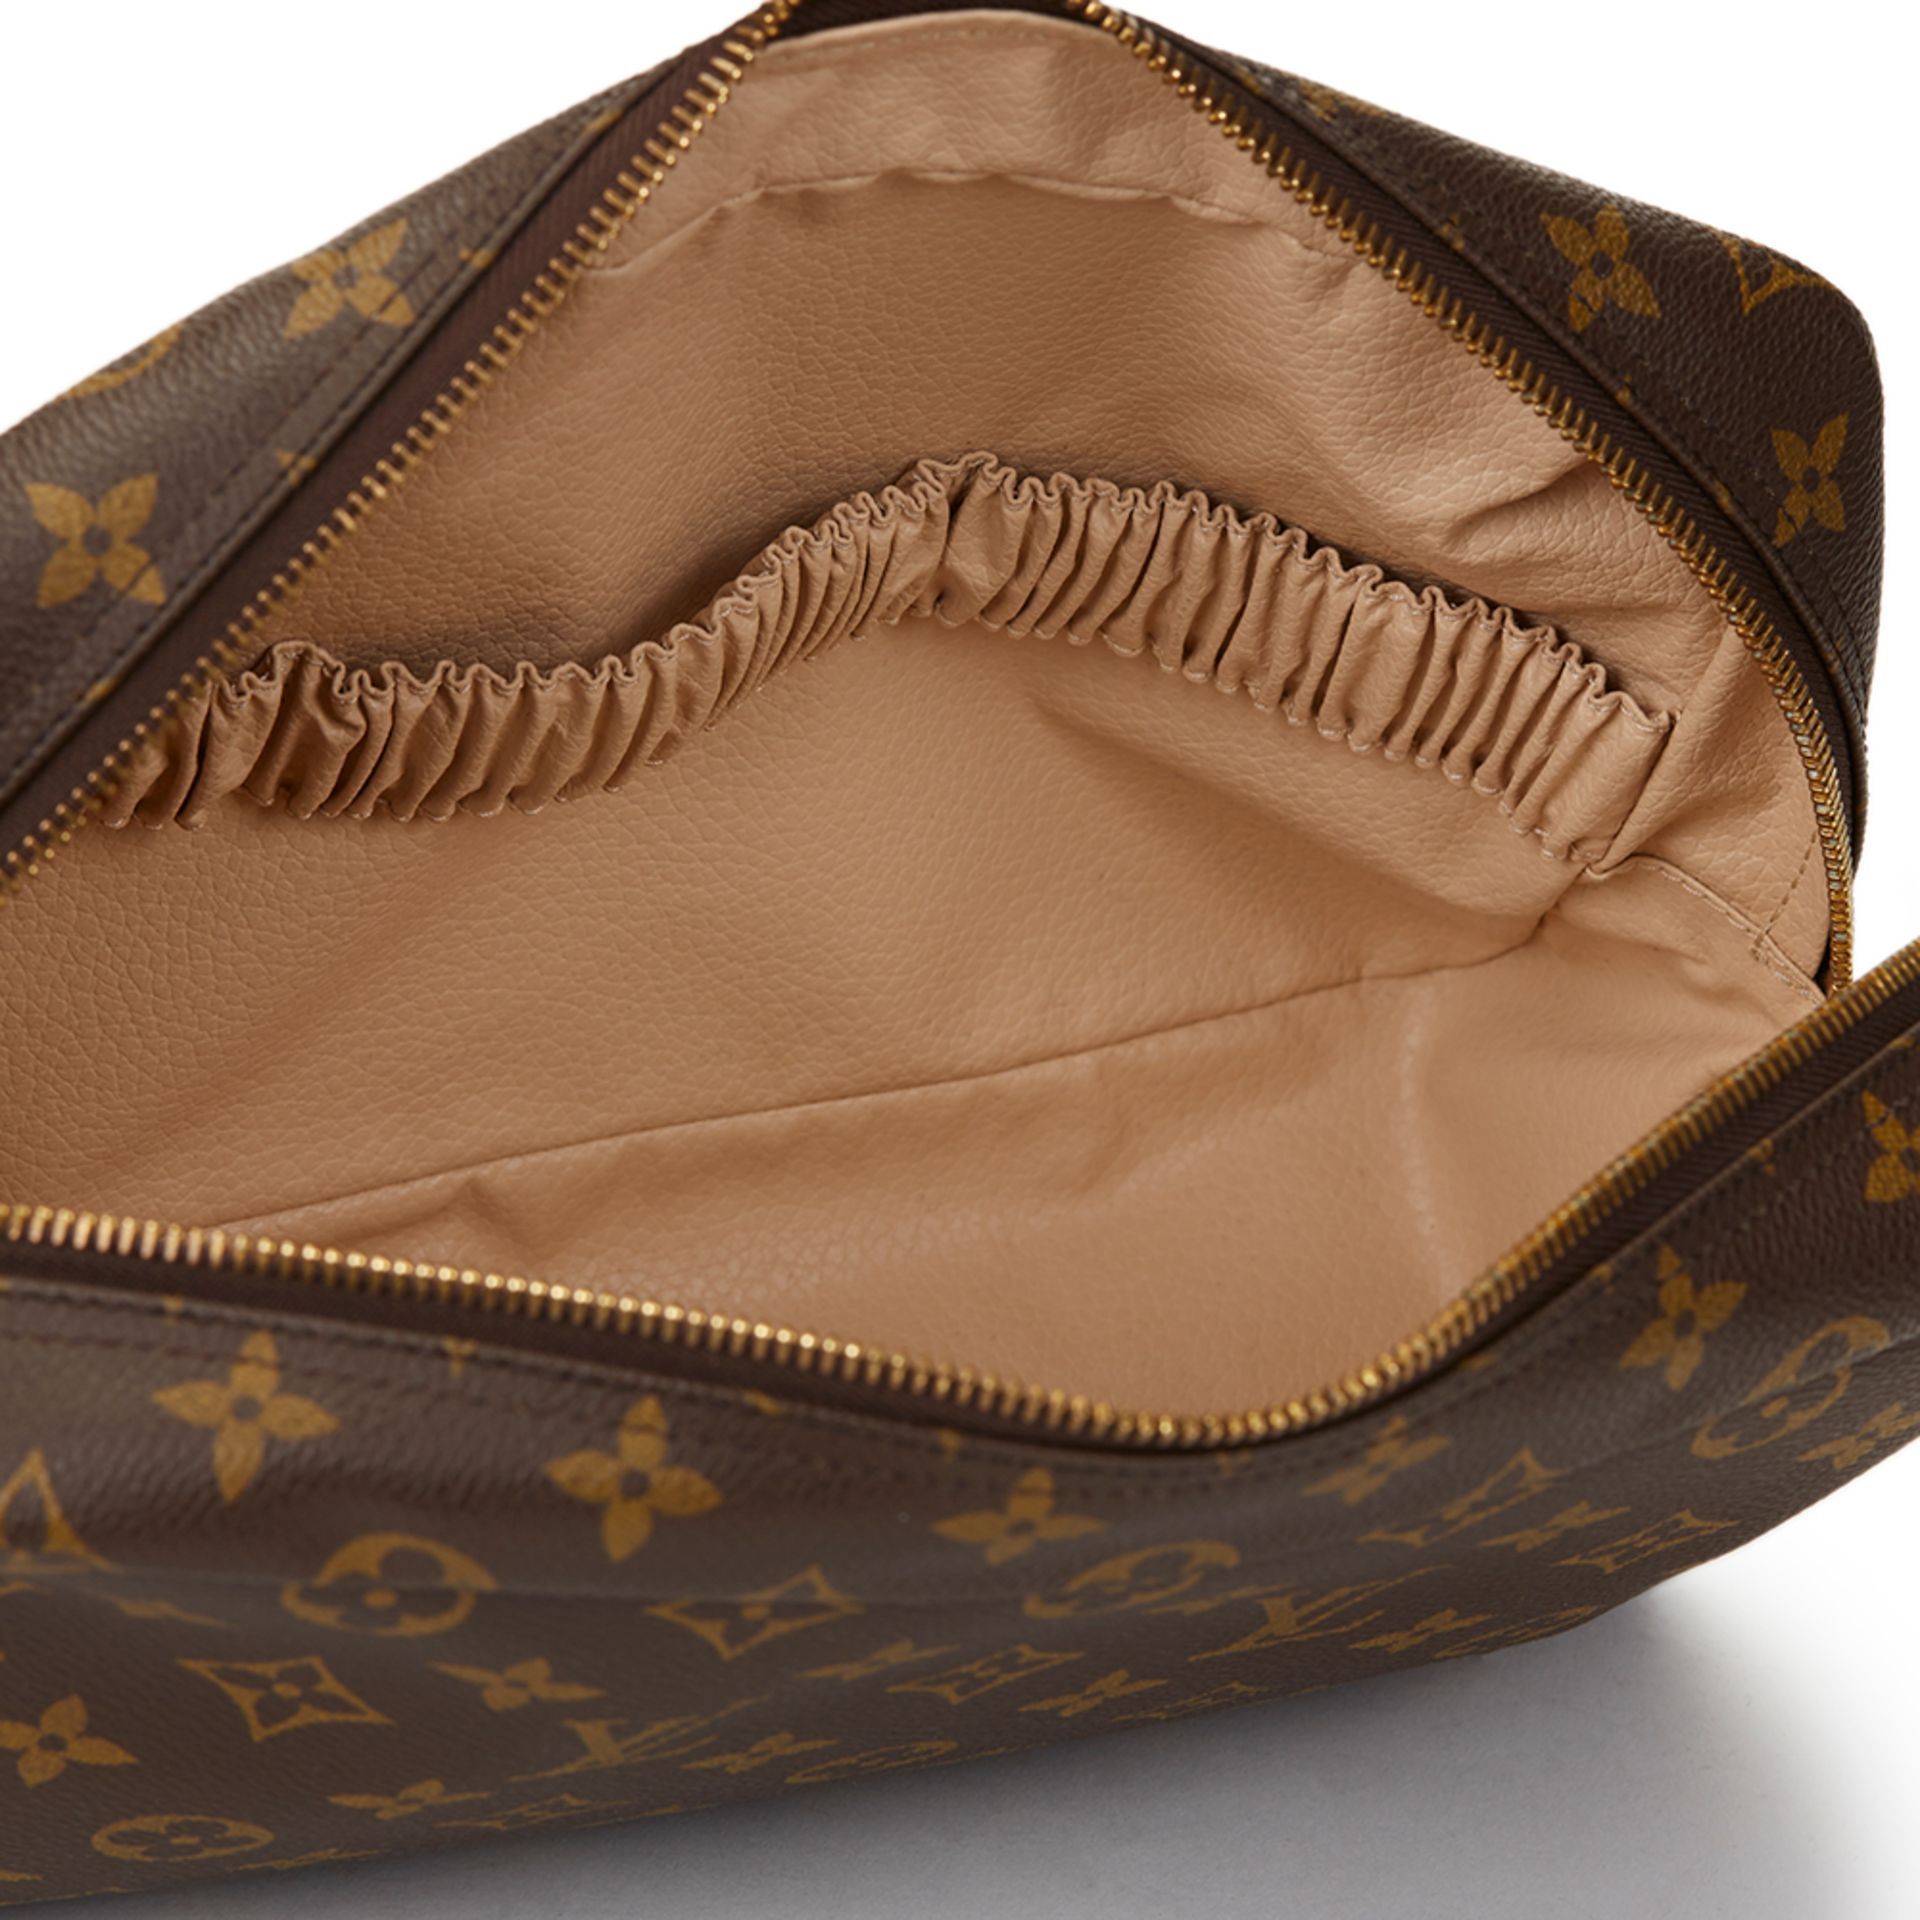 HB1180 Louis Vuitton Hand-painted 'Ca$h Me Outside' X Year Zero London Toiletry Pouch - Image 9 of 9